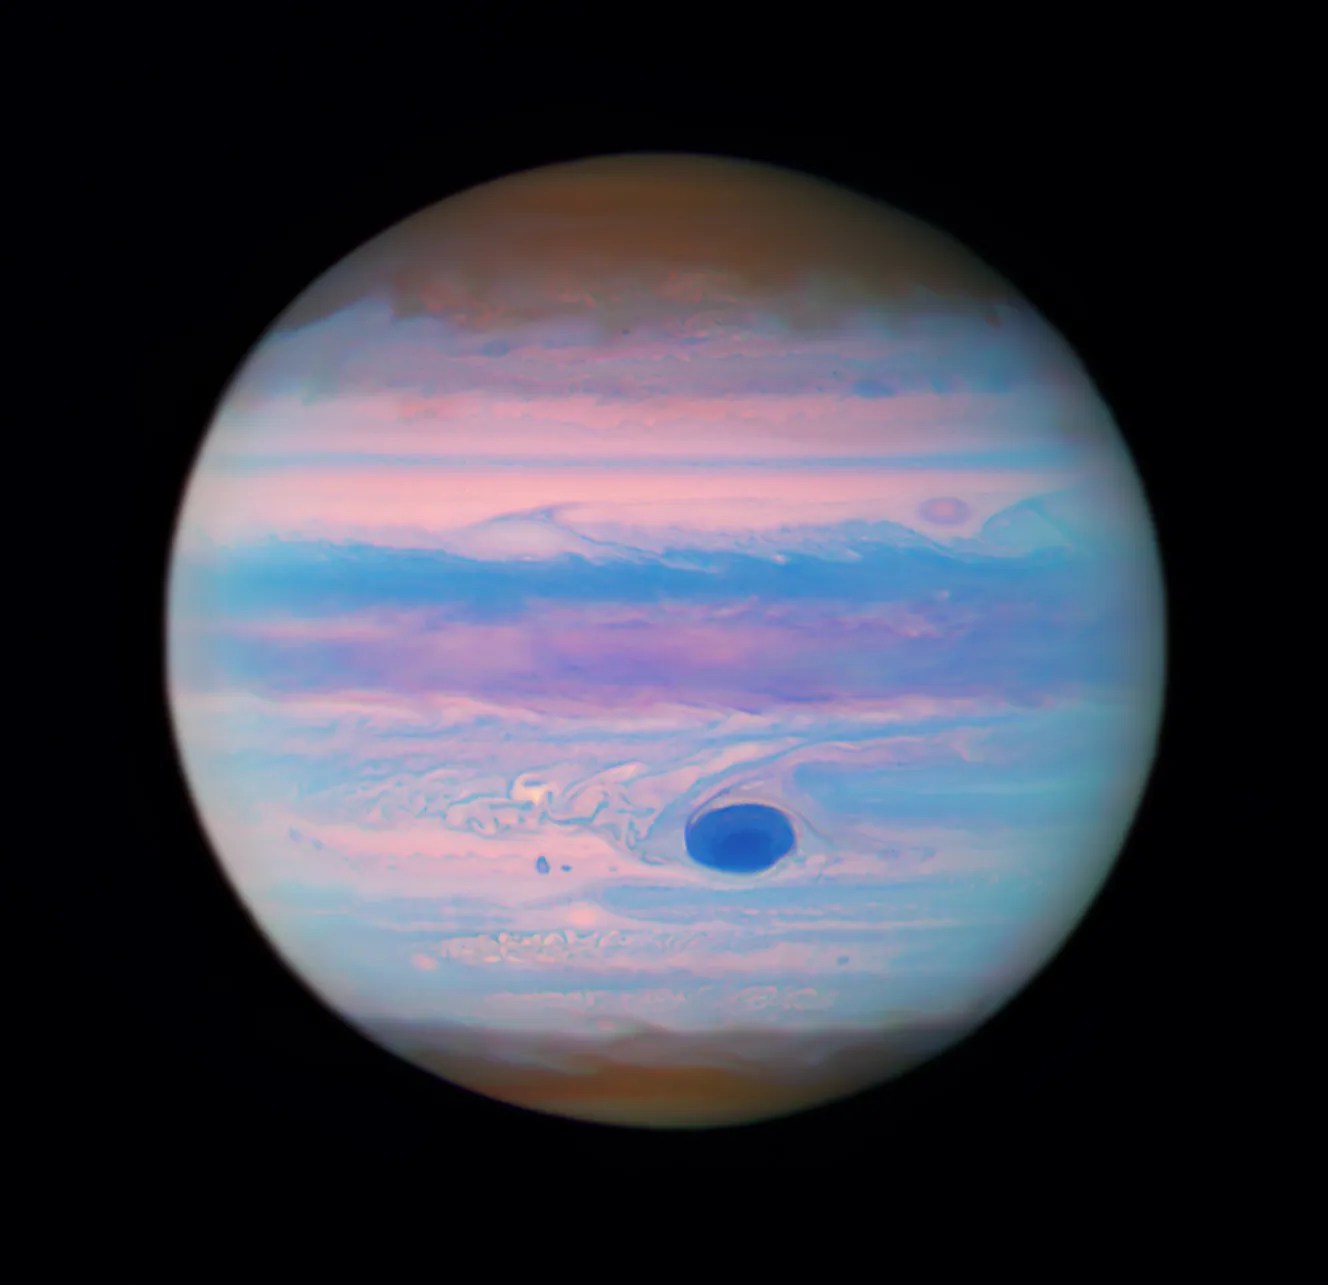 Jupiter looks iridescent in this ultraviolet image from the Hubble Space Telescope. The poles are a muted orange color, while swirls and stripes of pink, orange, blue, and purple cover the rest of the planet. Jupiter's 